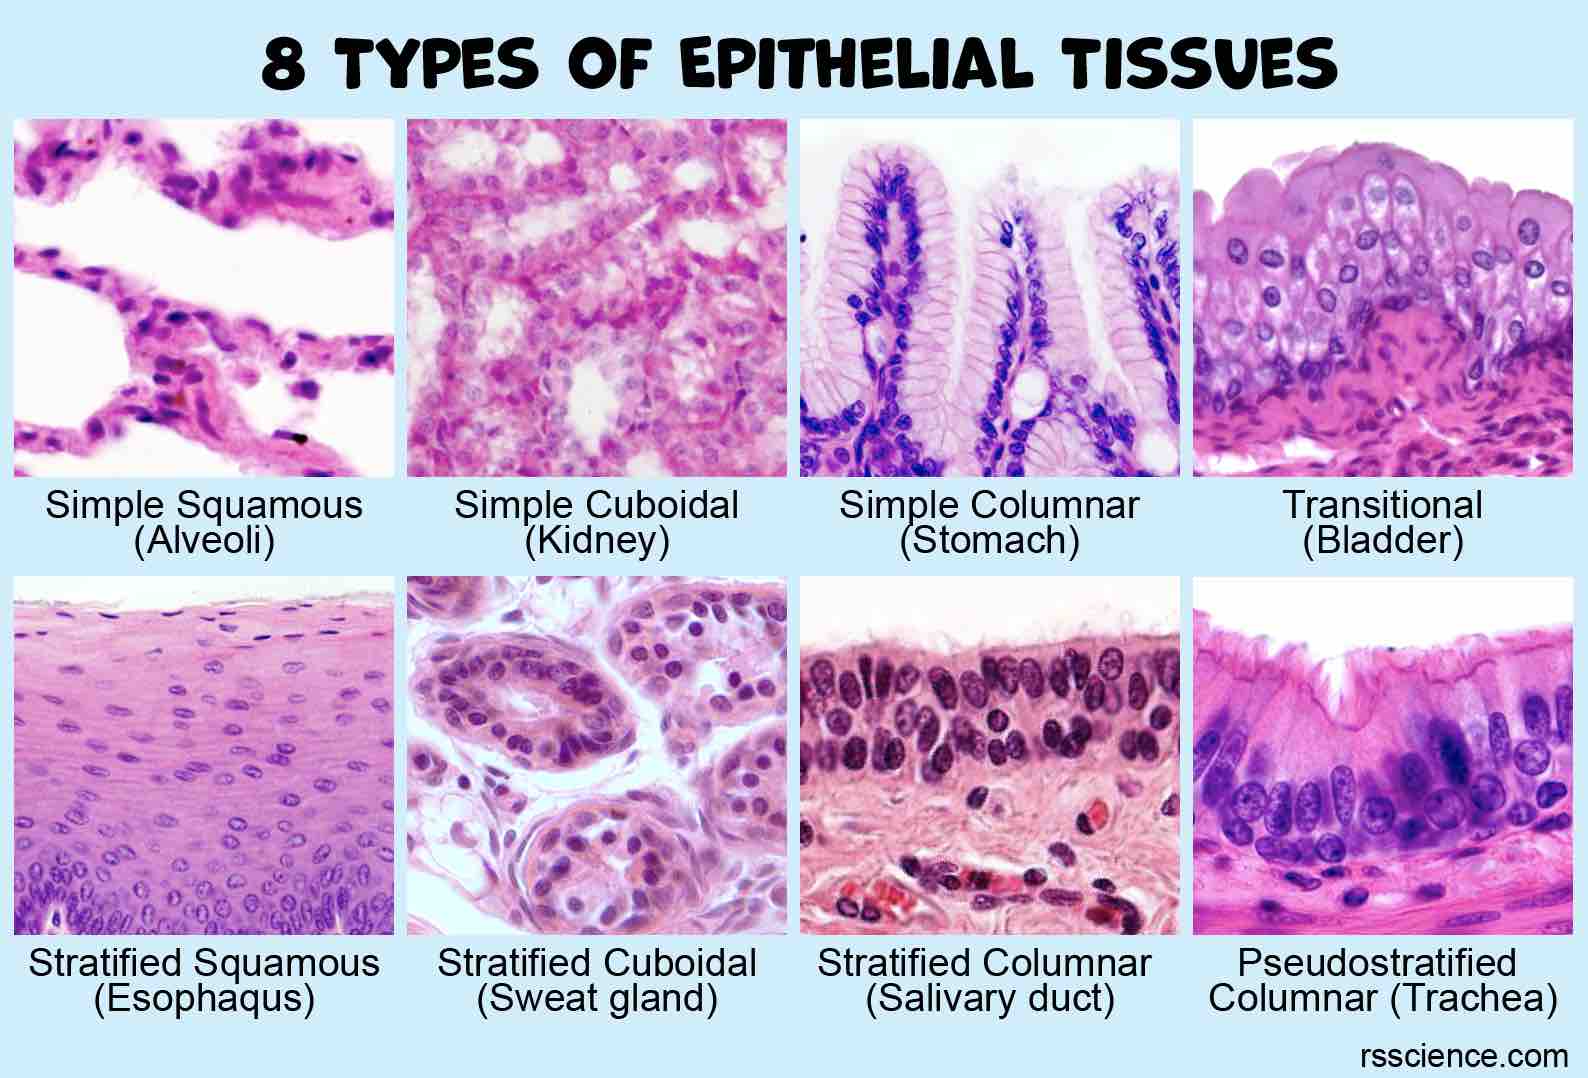 Questions About Epithelial Tissue